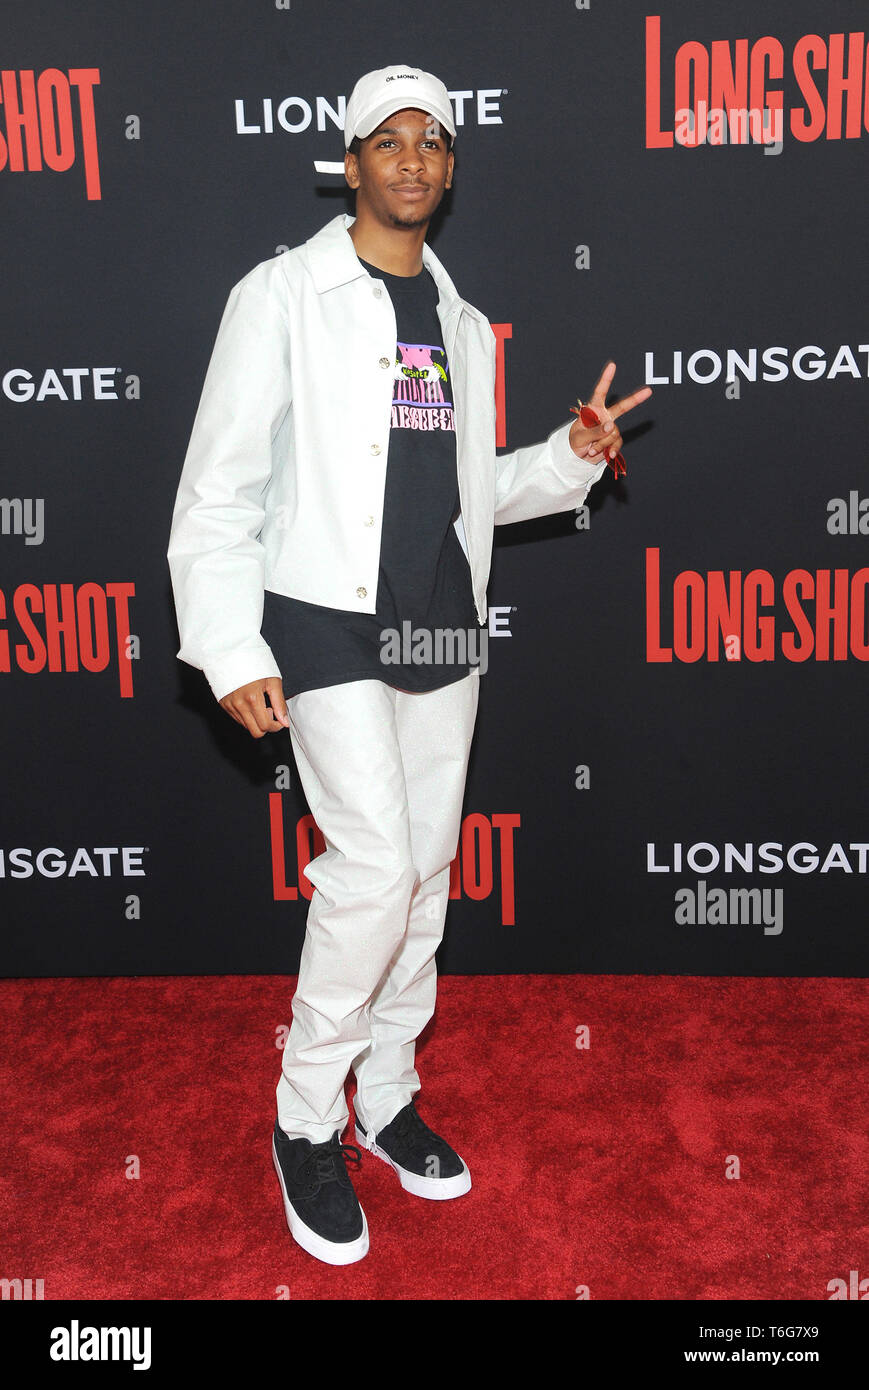 New York, New York, USA. 30th Apr, 2019. Brett Gray attends the New York premiere of 'Long Shot' at AMC Lincoln Square on April 30, 2019 in New York City. Credit: John Palmer/Media Punch/Alamy Live News Stock Photo